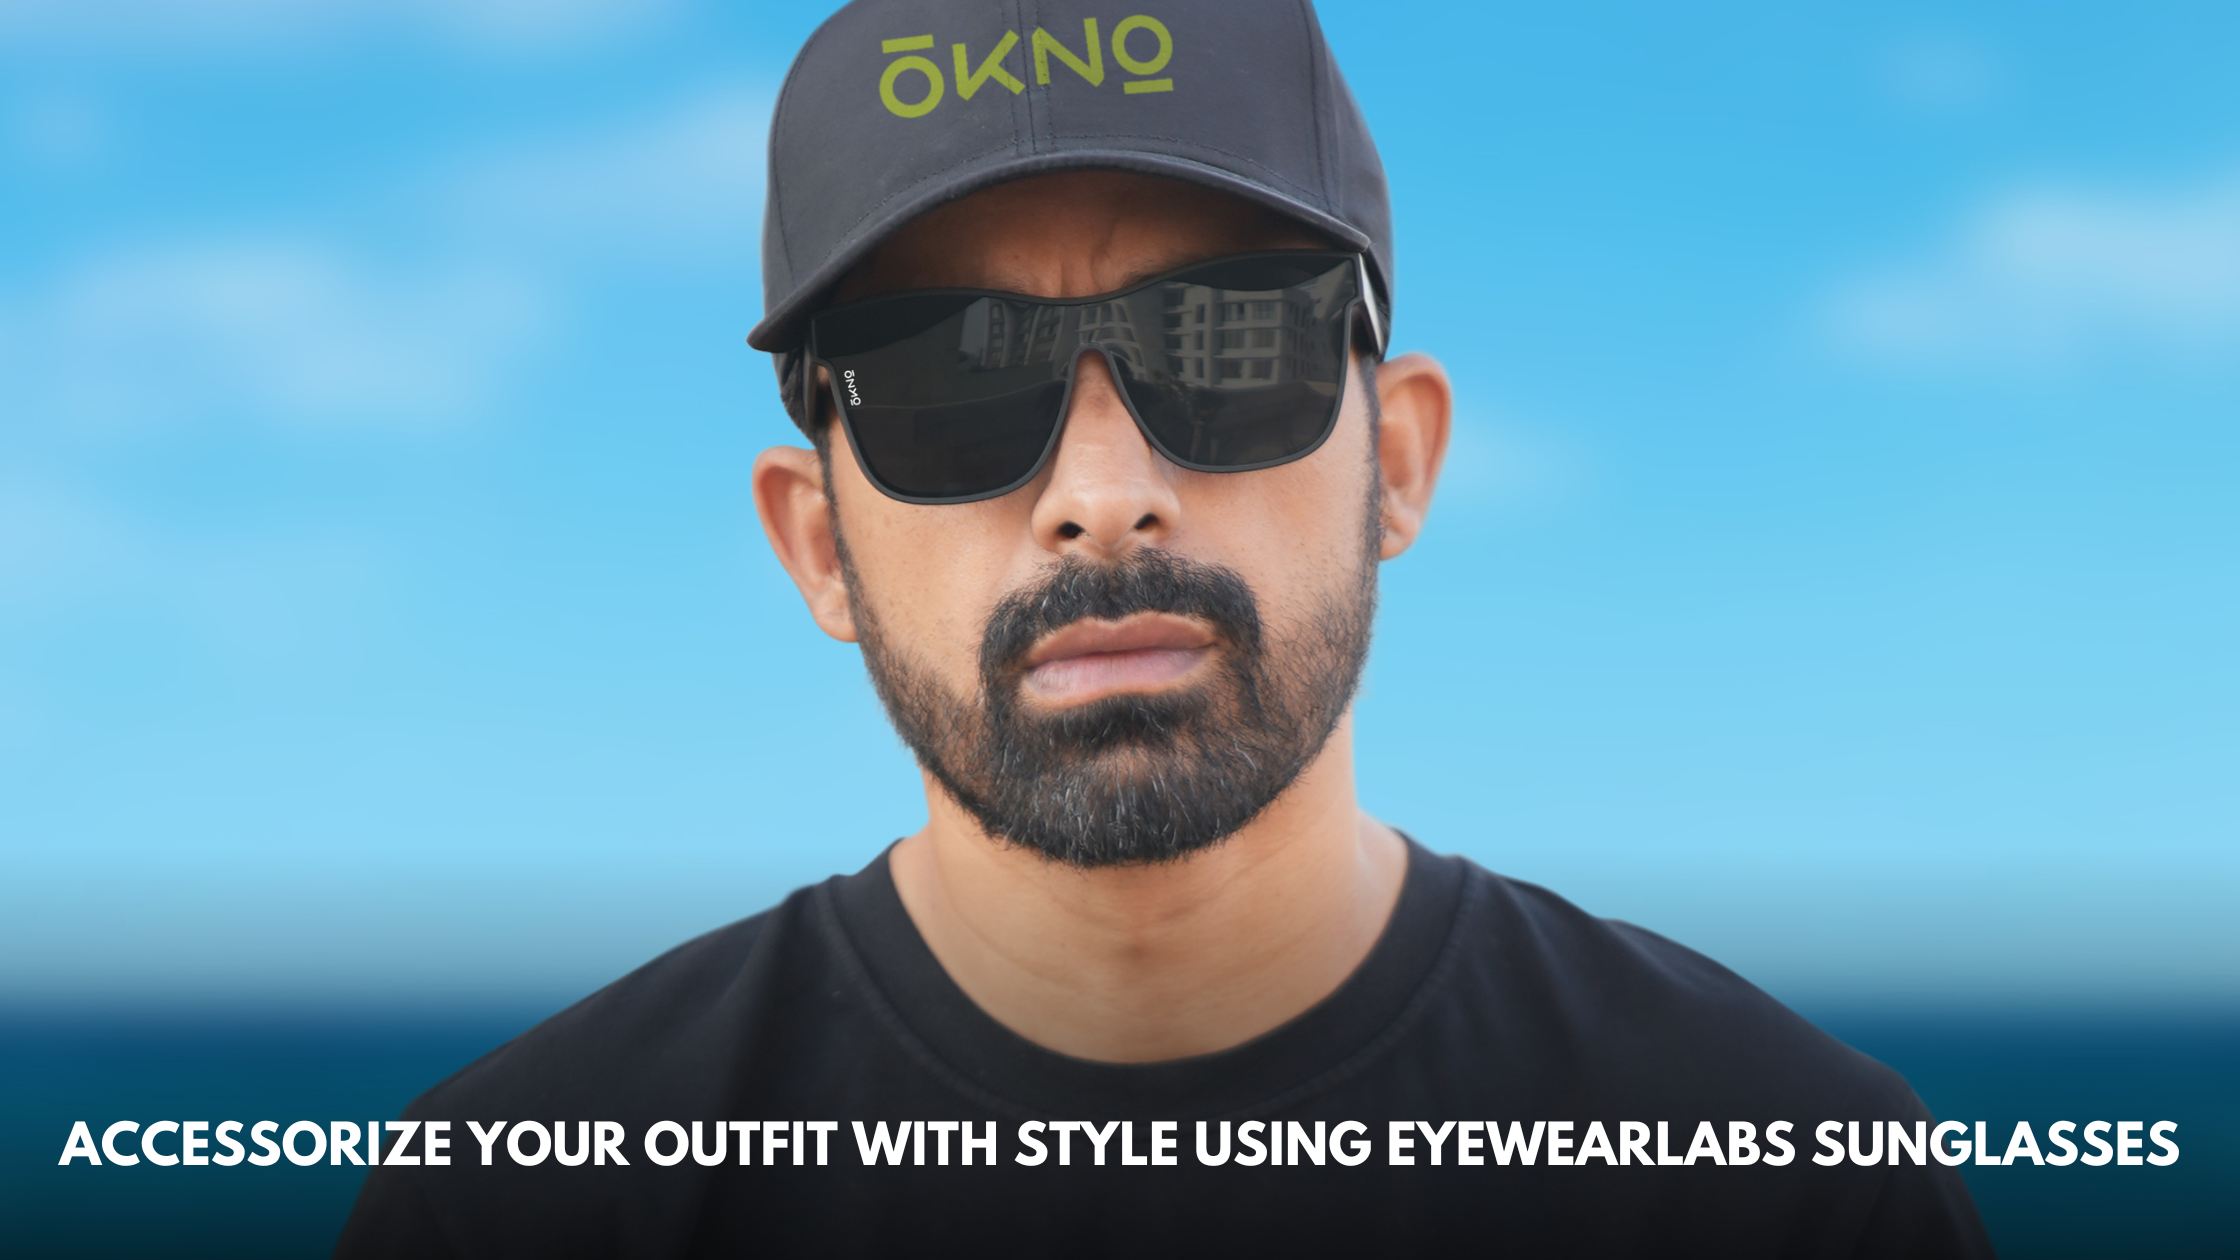 Accessorize Your Outfit with Style Using Eyewearlabs Sunglasses